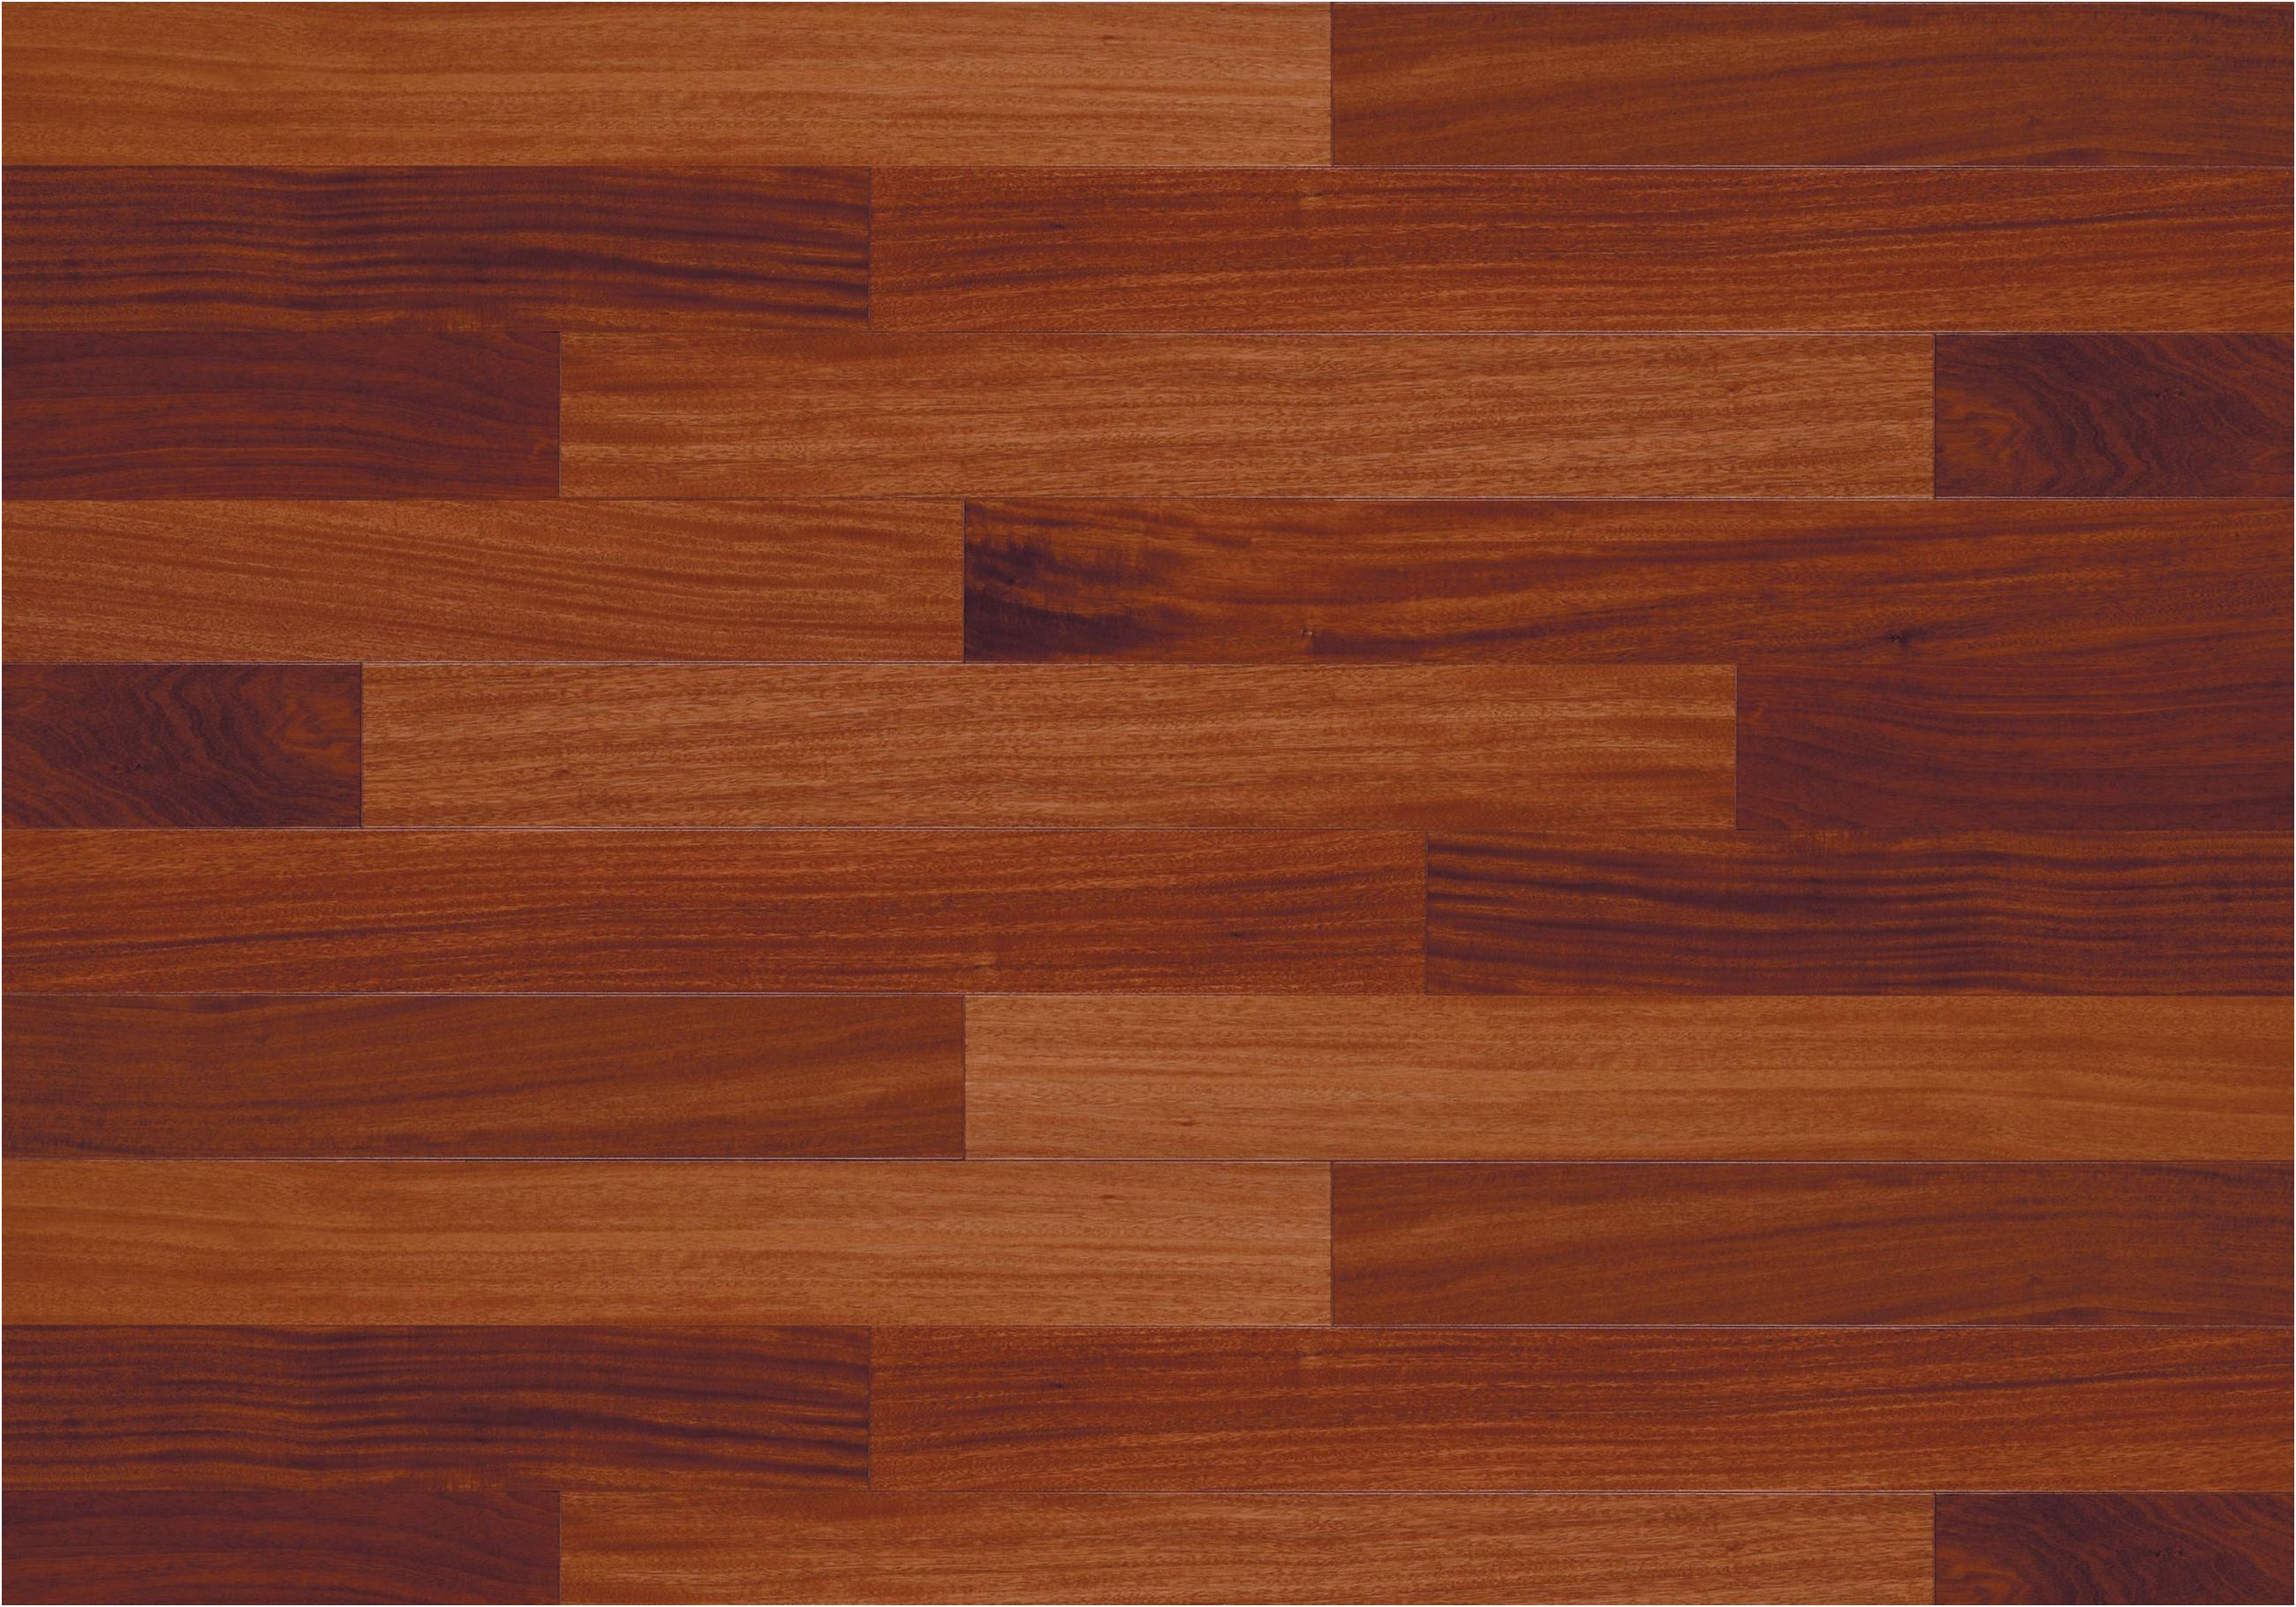 10 Fantastic Prefinished Hardwood Flooring for Sale 2022 free download prefinished hardwood flooring for sale of prefinished hardwood flooring pros and cons images floor hickory throughout prefinished hardwood flooring pros and cons images floor pros and cons s